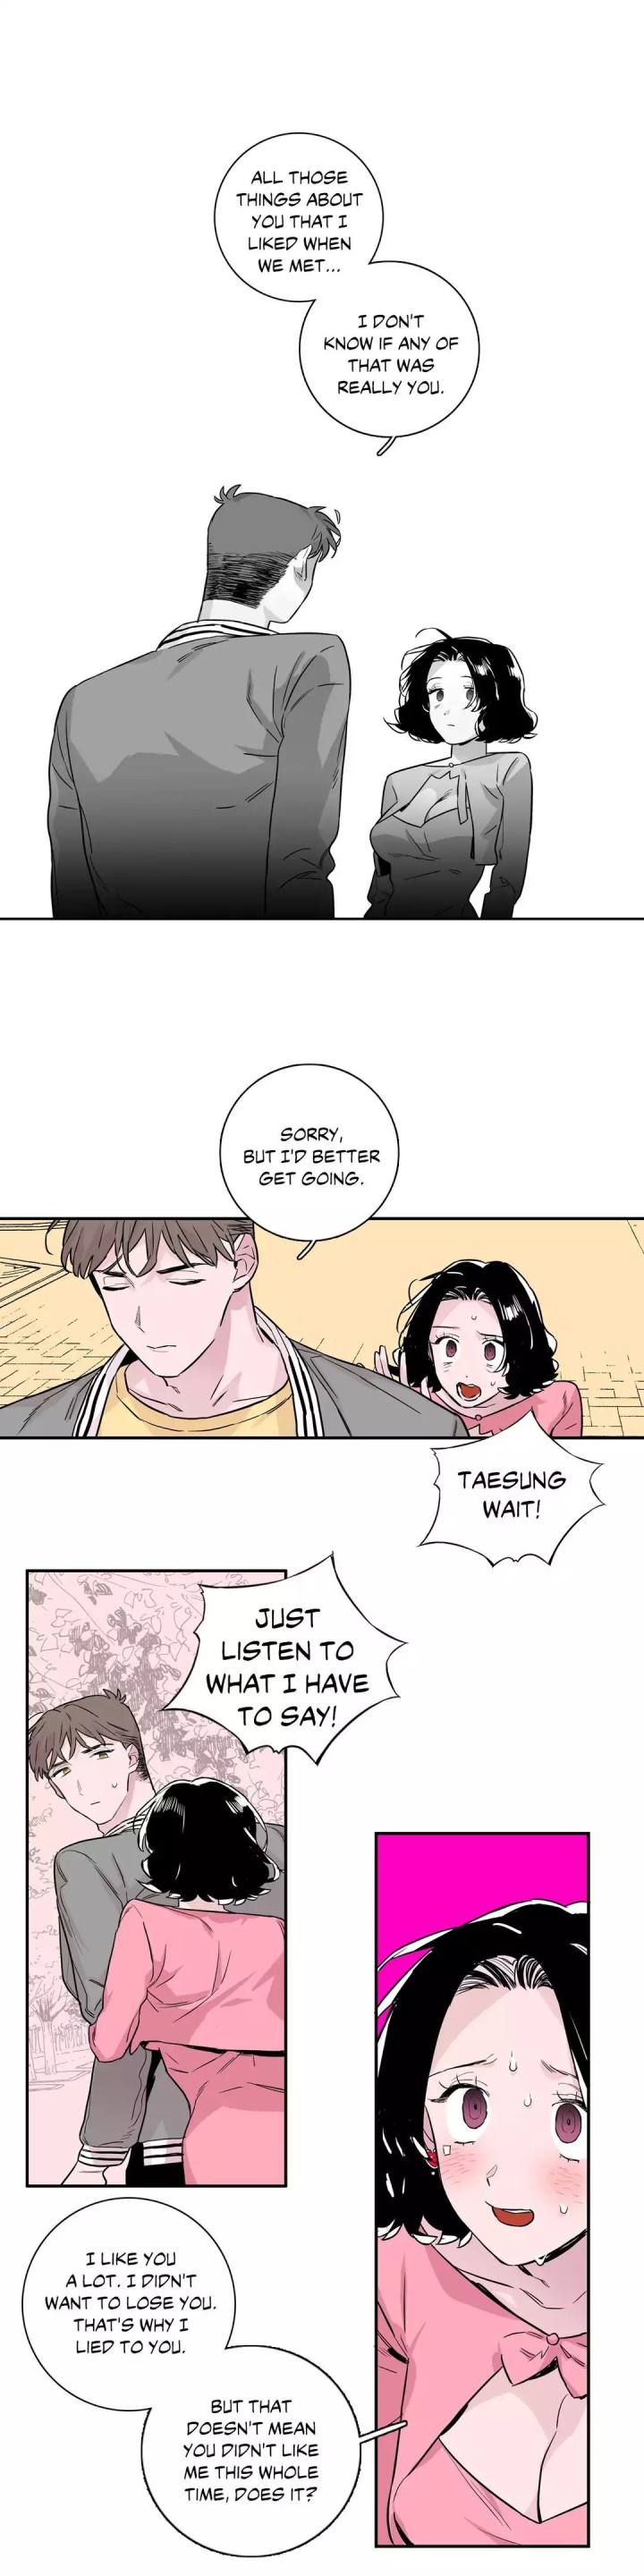 Vanishing Twin - Chapter 51 Page 6